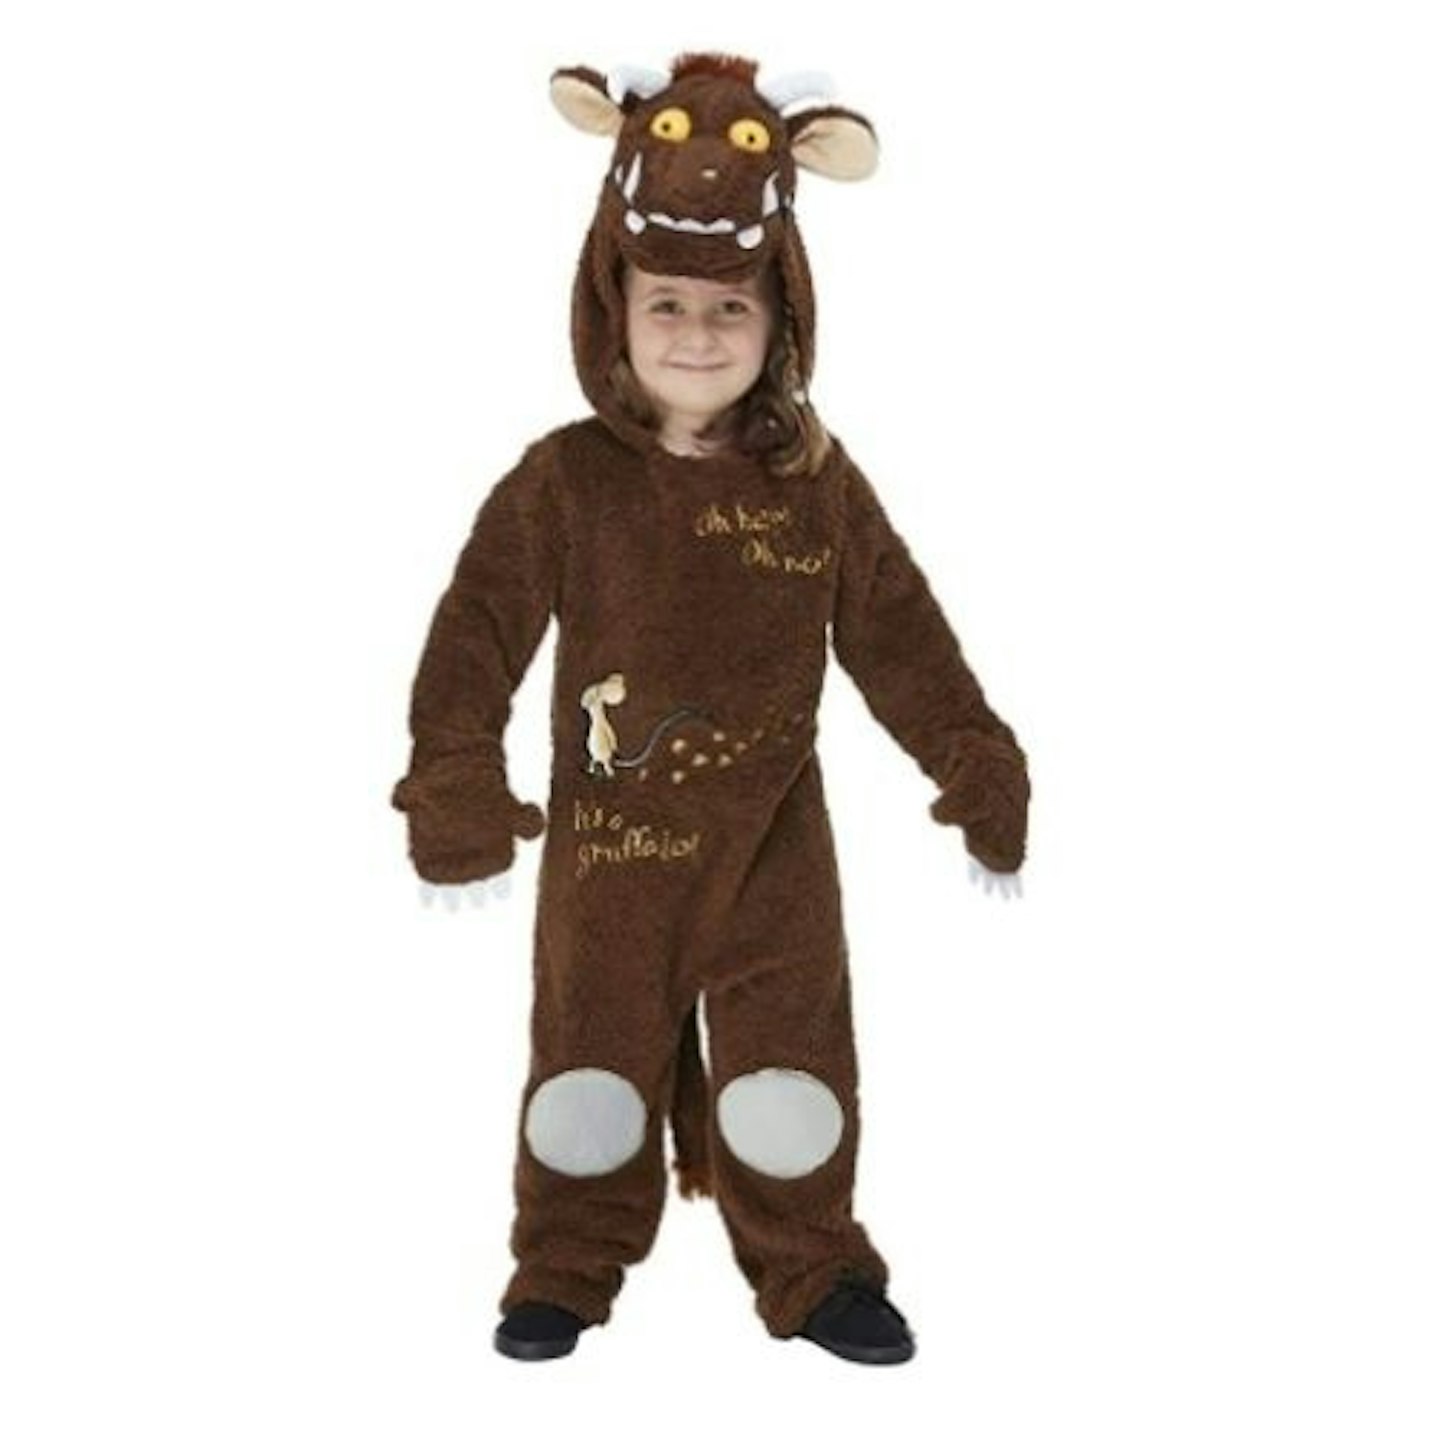 Smiffys Officially Licensed Gruffalo Deluxe Costume